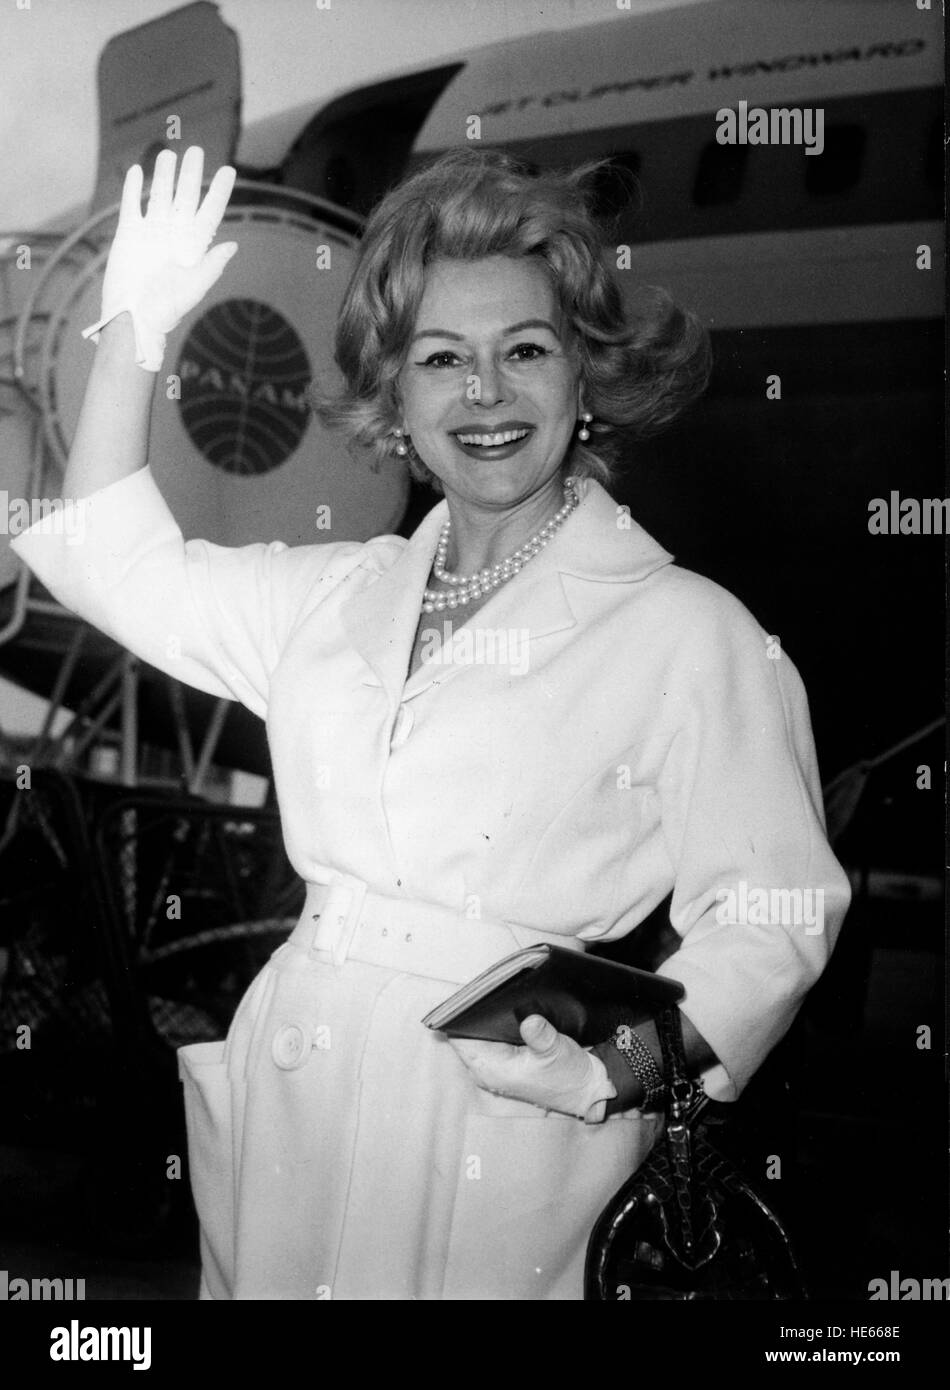 Actress Zsa Zsa Gabor waves when arriving at airport Stock Photo - Alamy